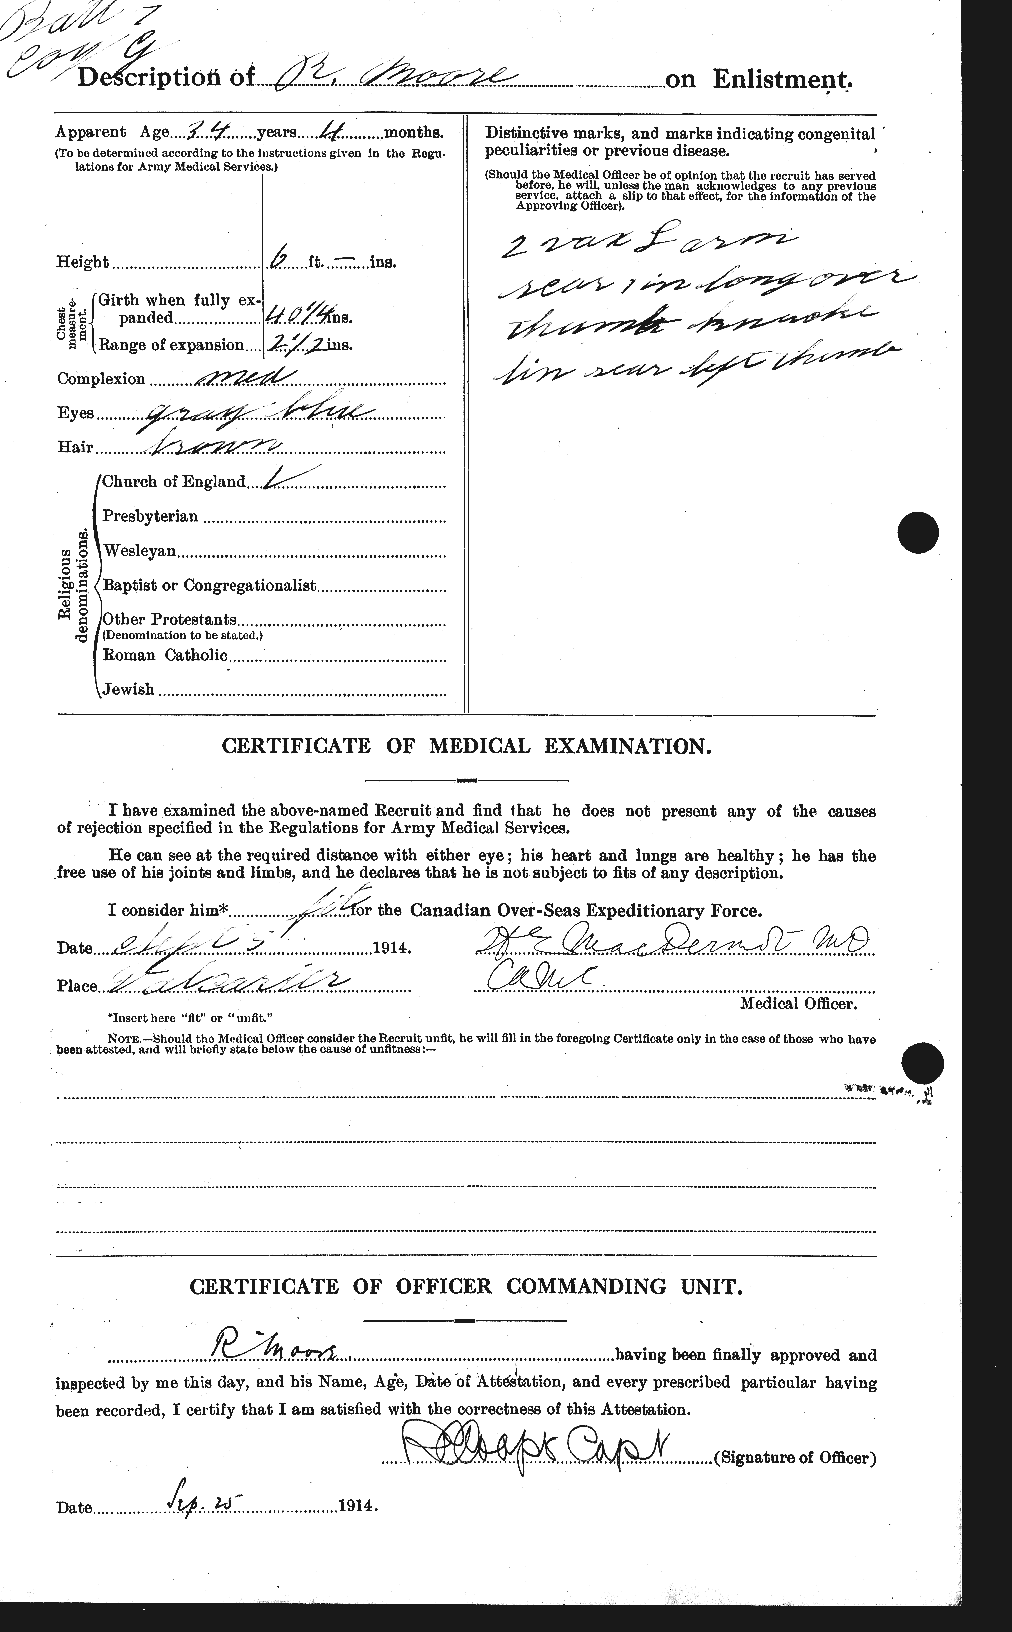 Personnel Records of the First World War - CEF 503554b